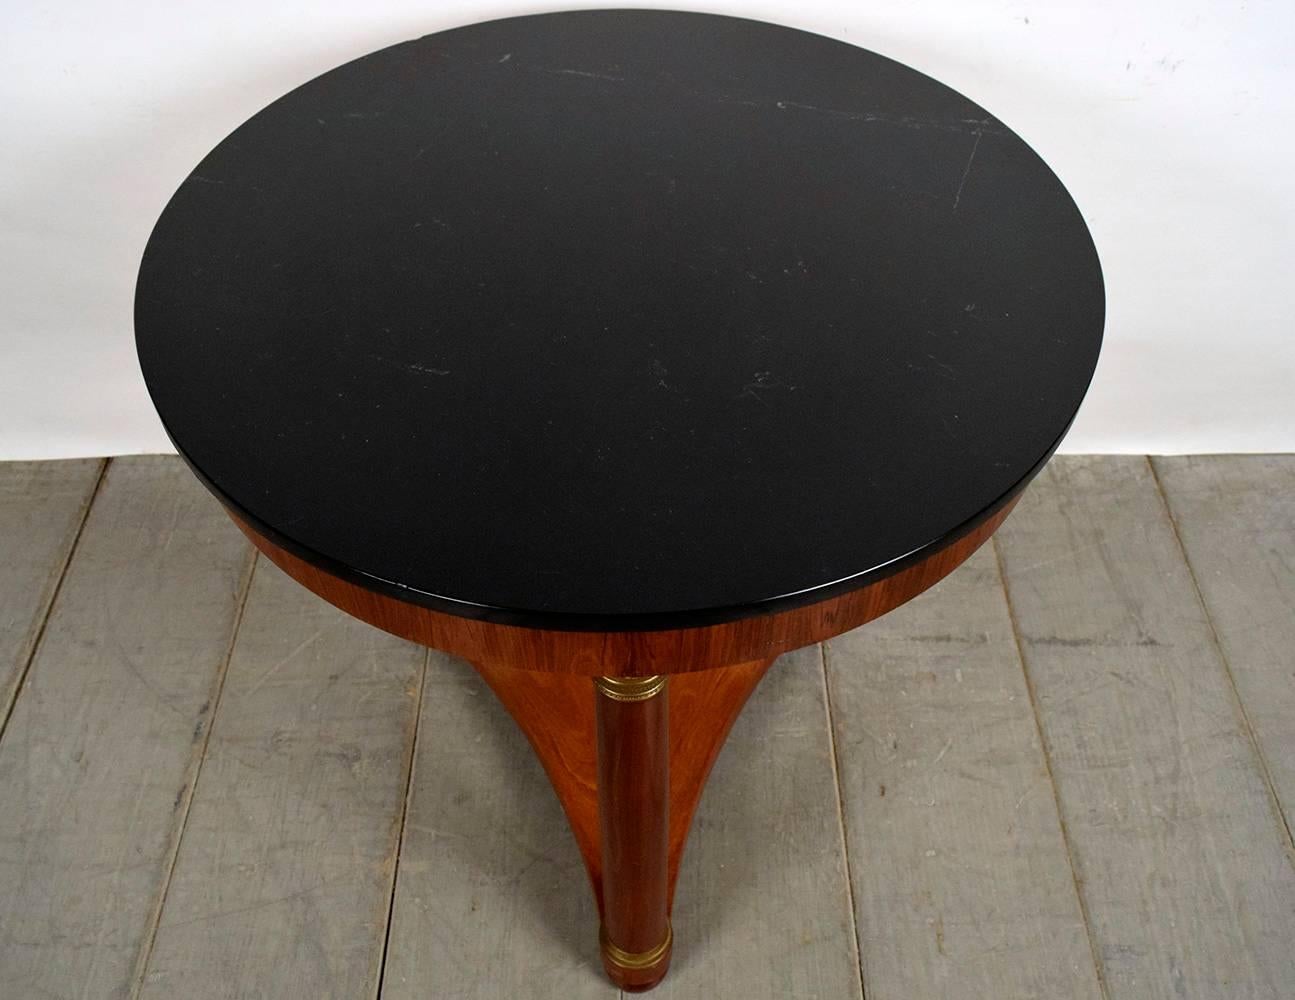 Carved French Empire Round Marble-Top End Table